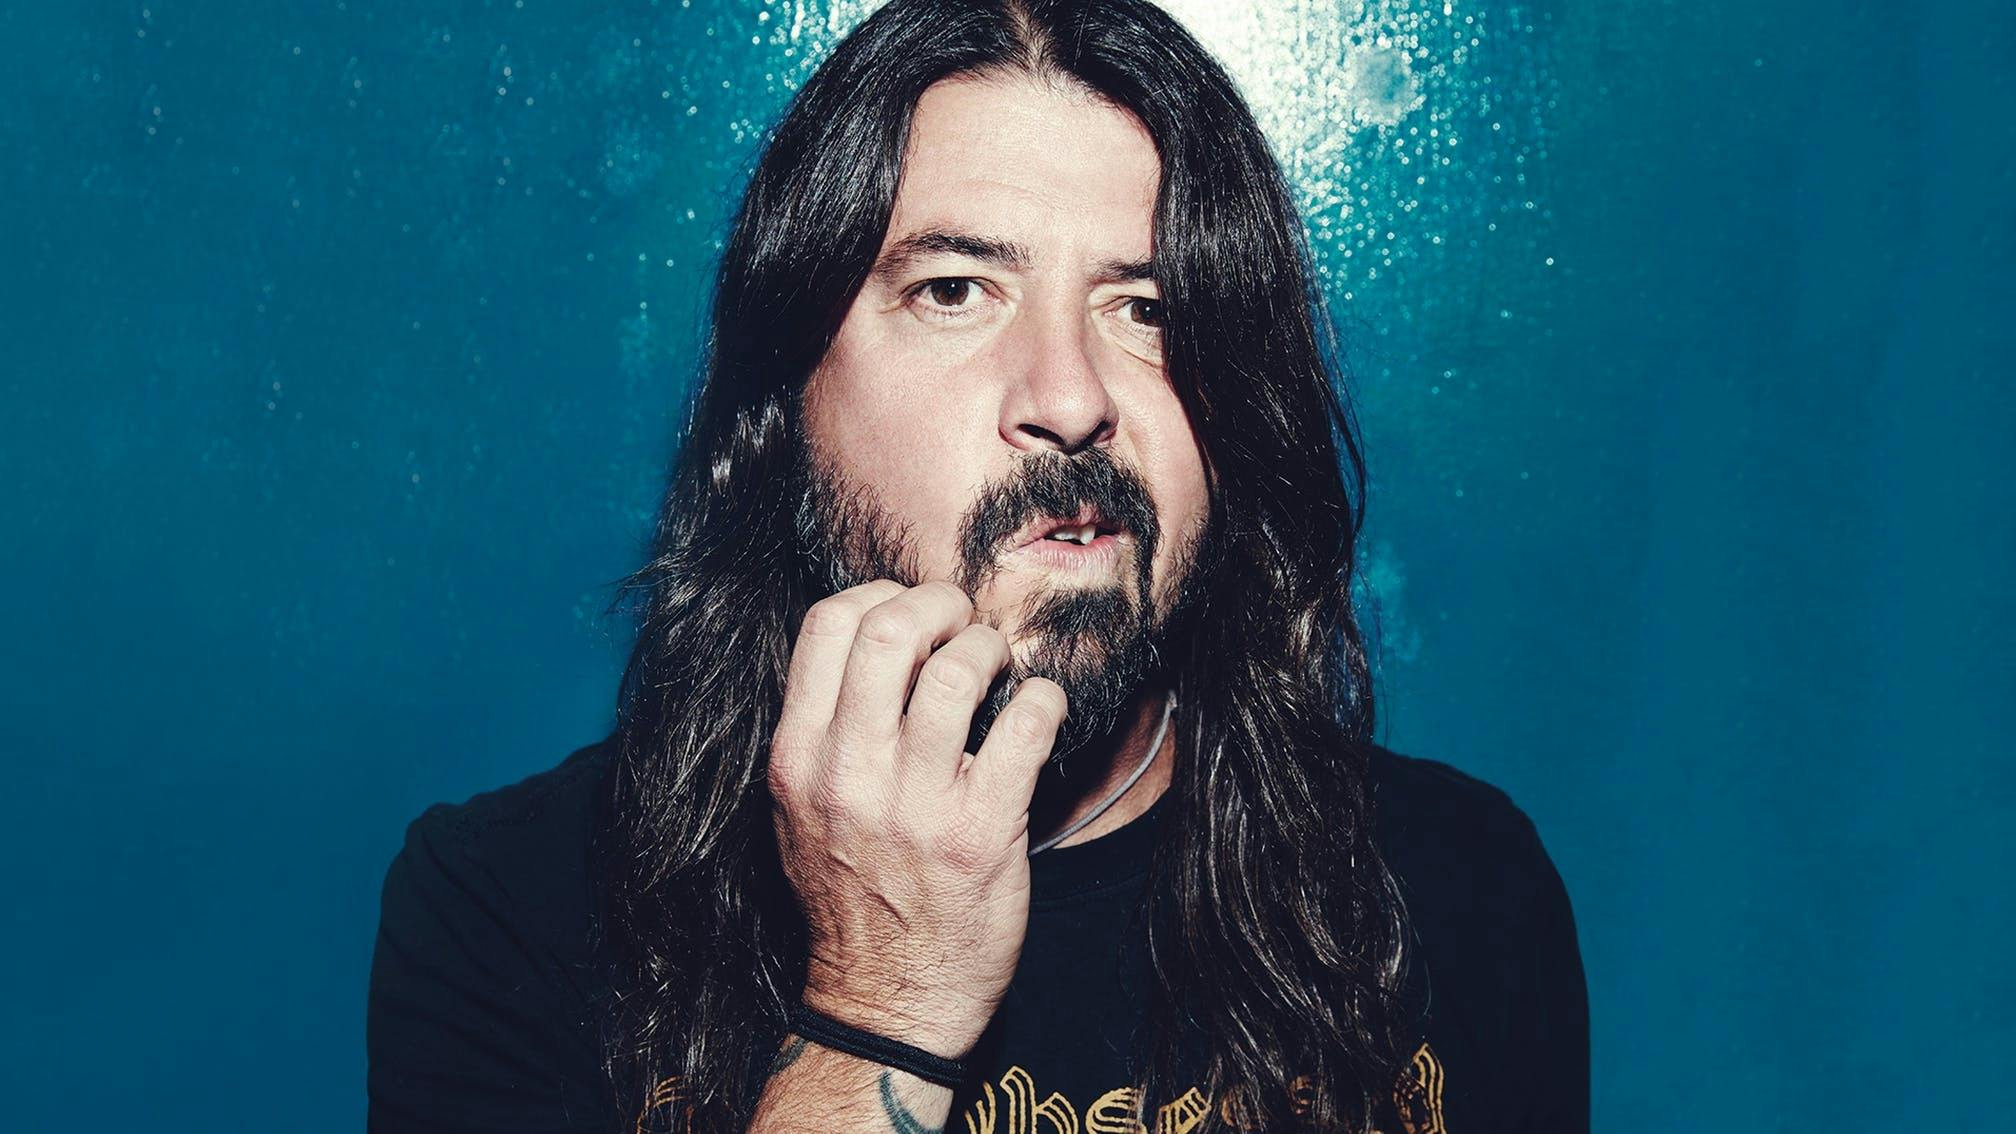 Dave Grohl confirms that he played drums on the new Foo Fighters album